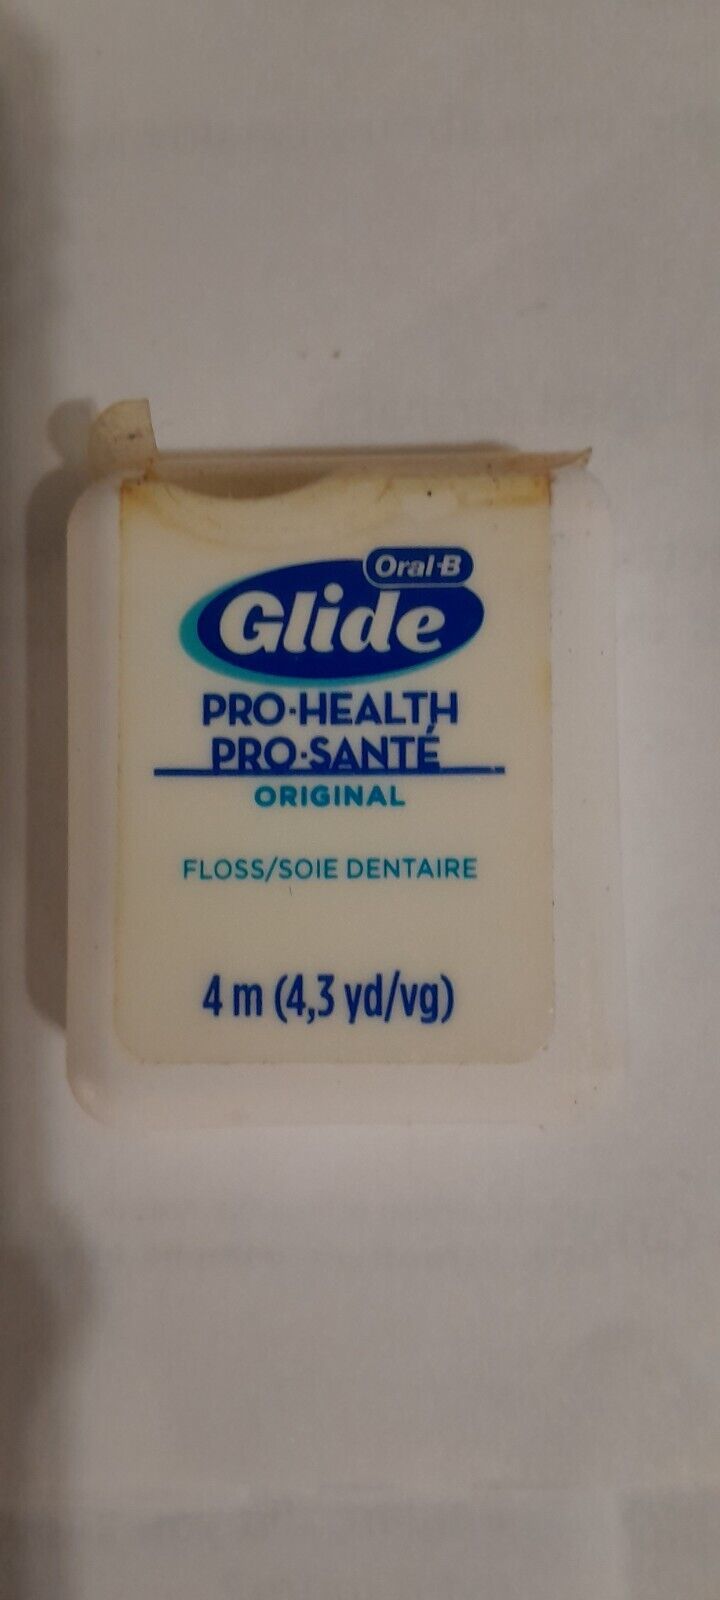 Primary image for Oral-B Glide Pro-Health Original Floss